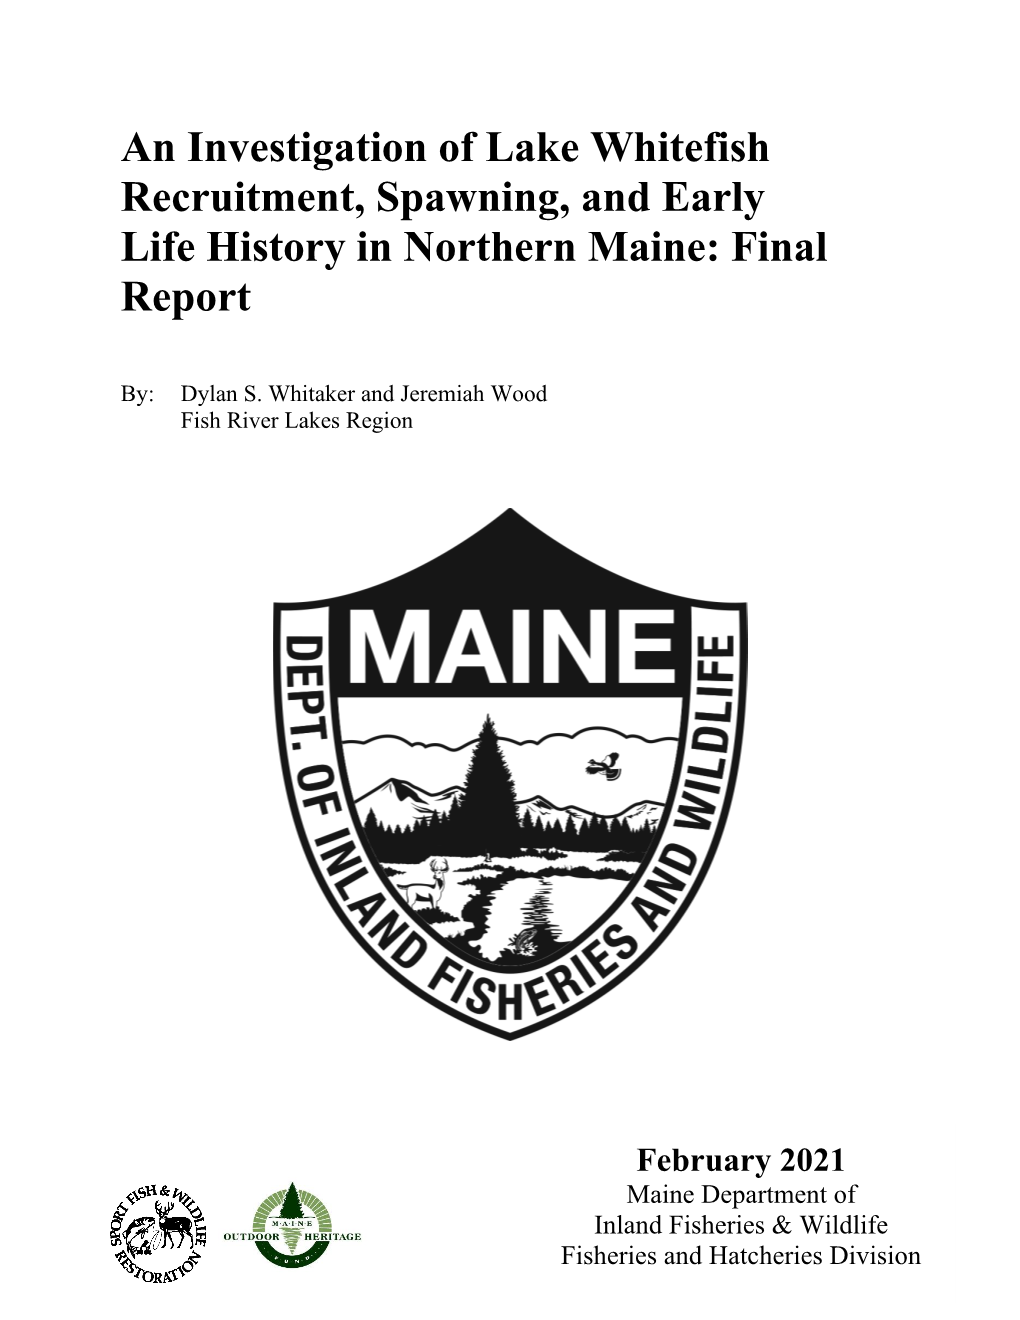 An Investigation of Lake Whitefish Recruitment, Spawning, and Early Life History in Northern Maine: Final Report